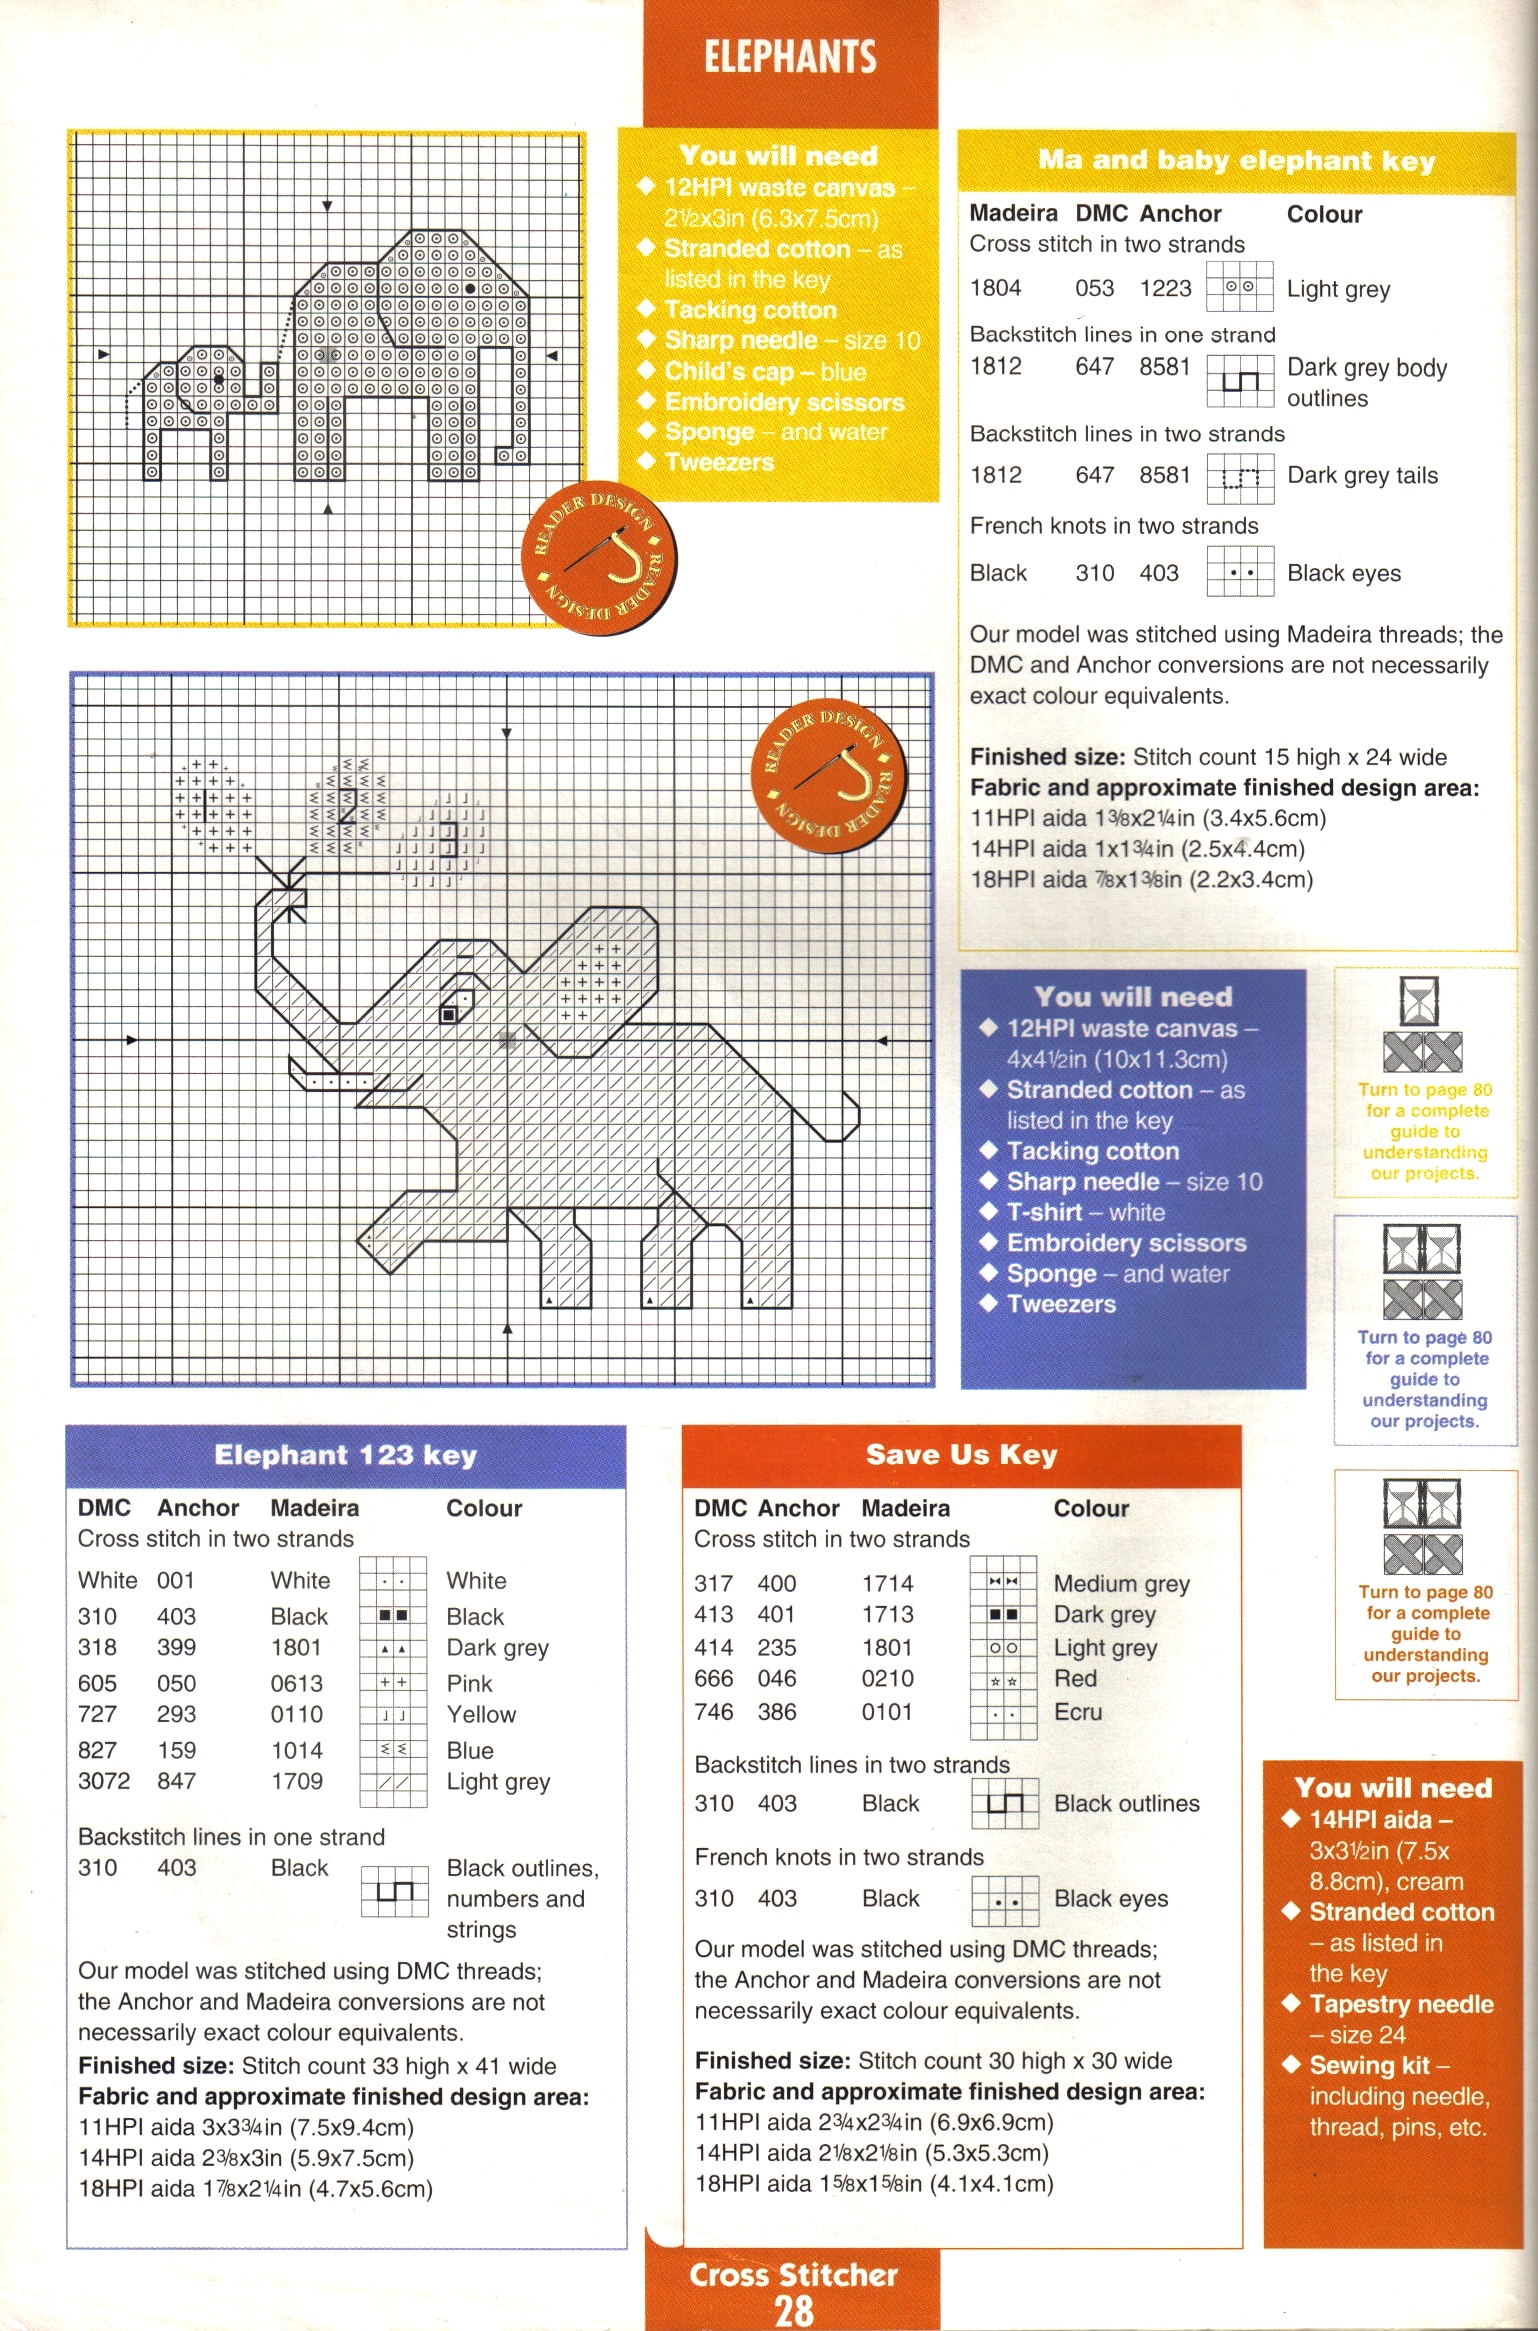 Cross stitch patterns for babies some elephants